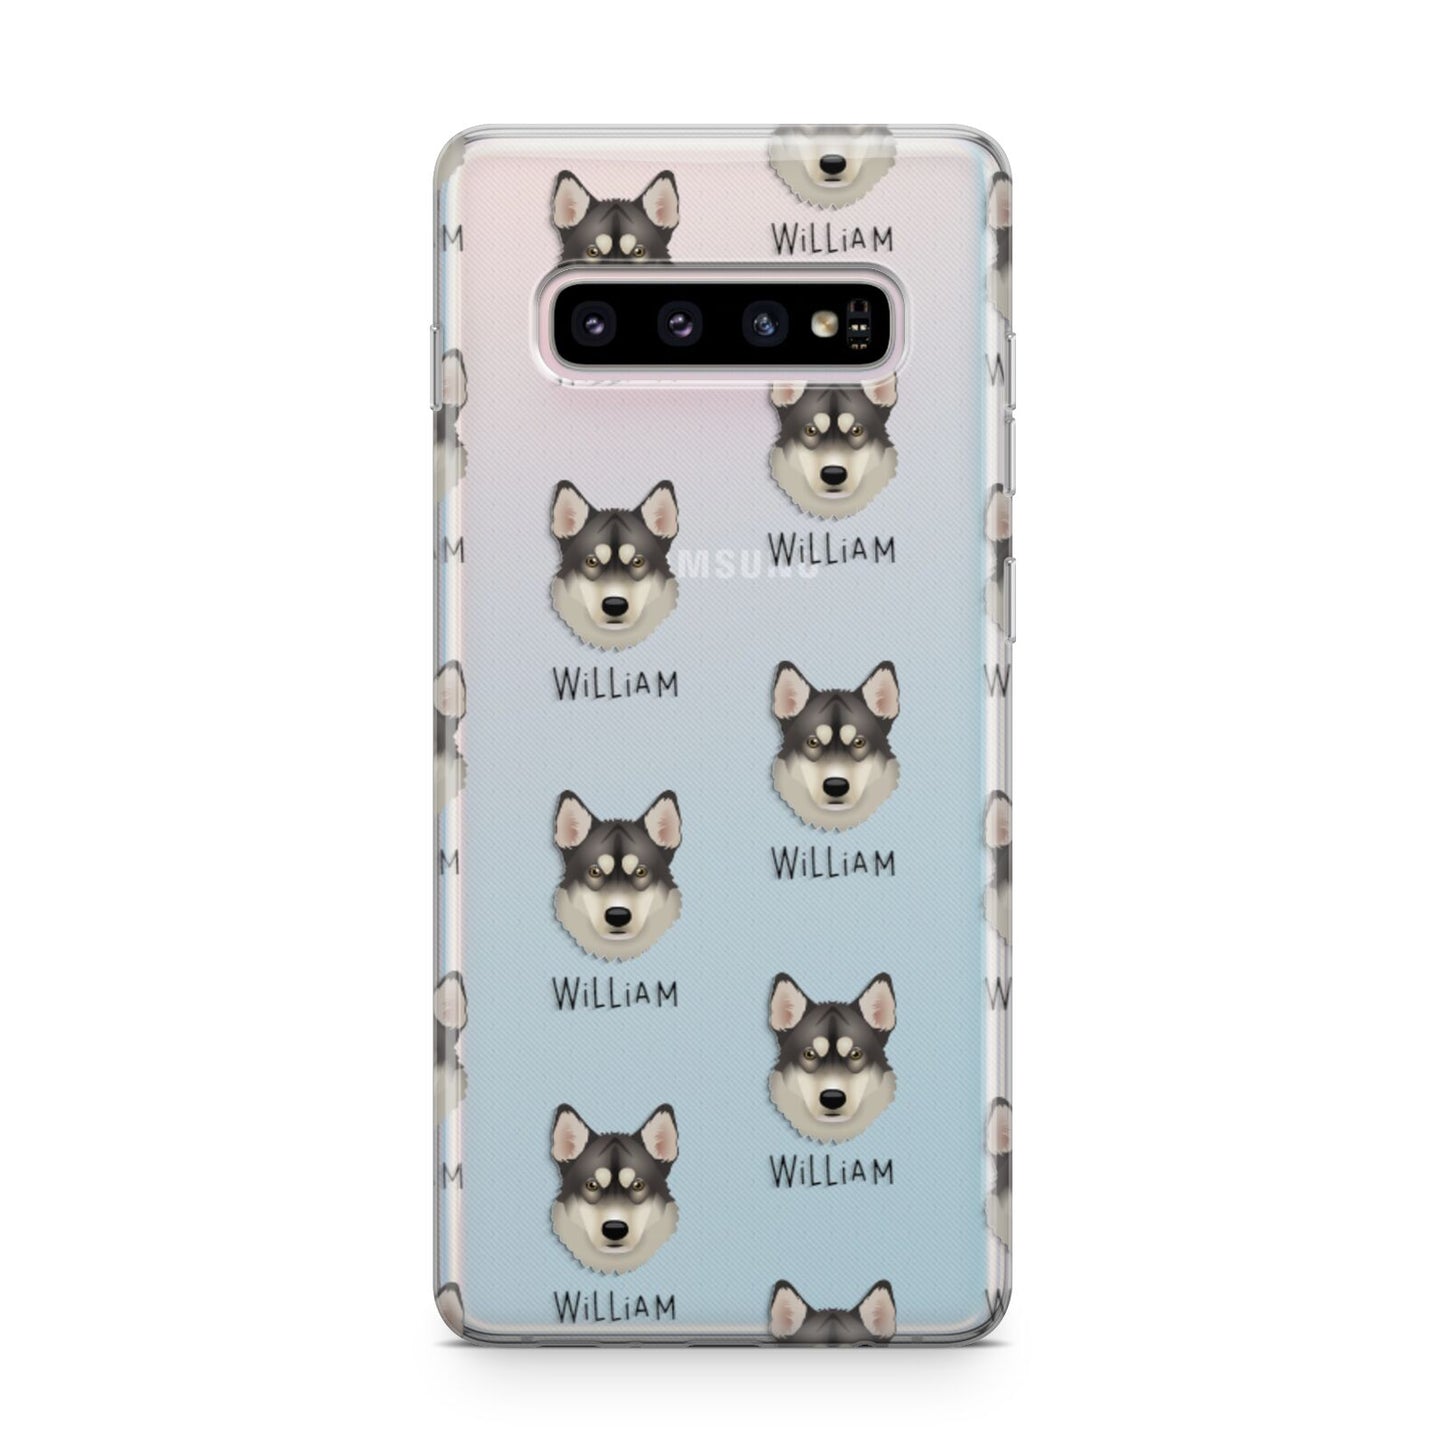 Tamaskan Icon with Name Samsung Galaxy S10 Plus Case